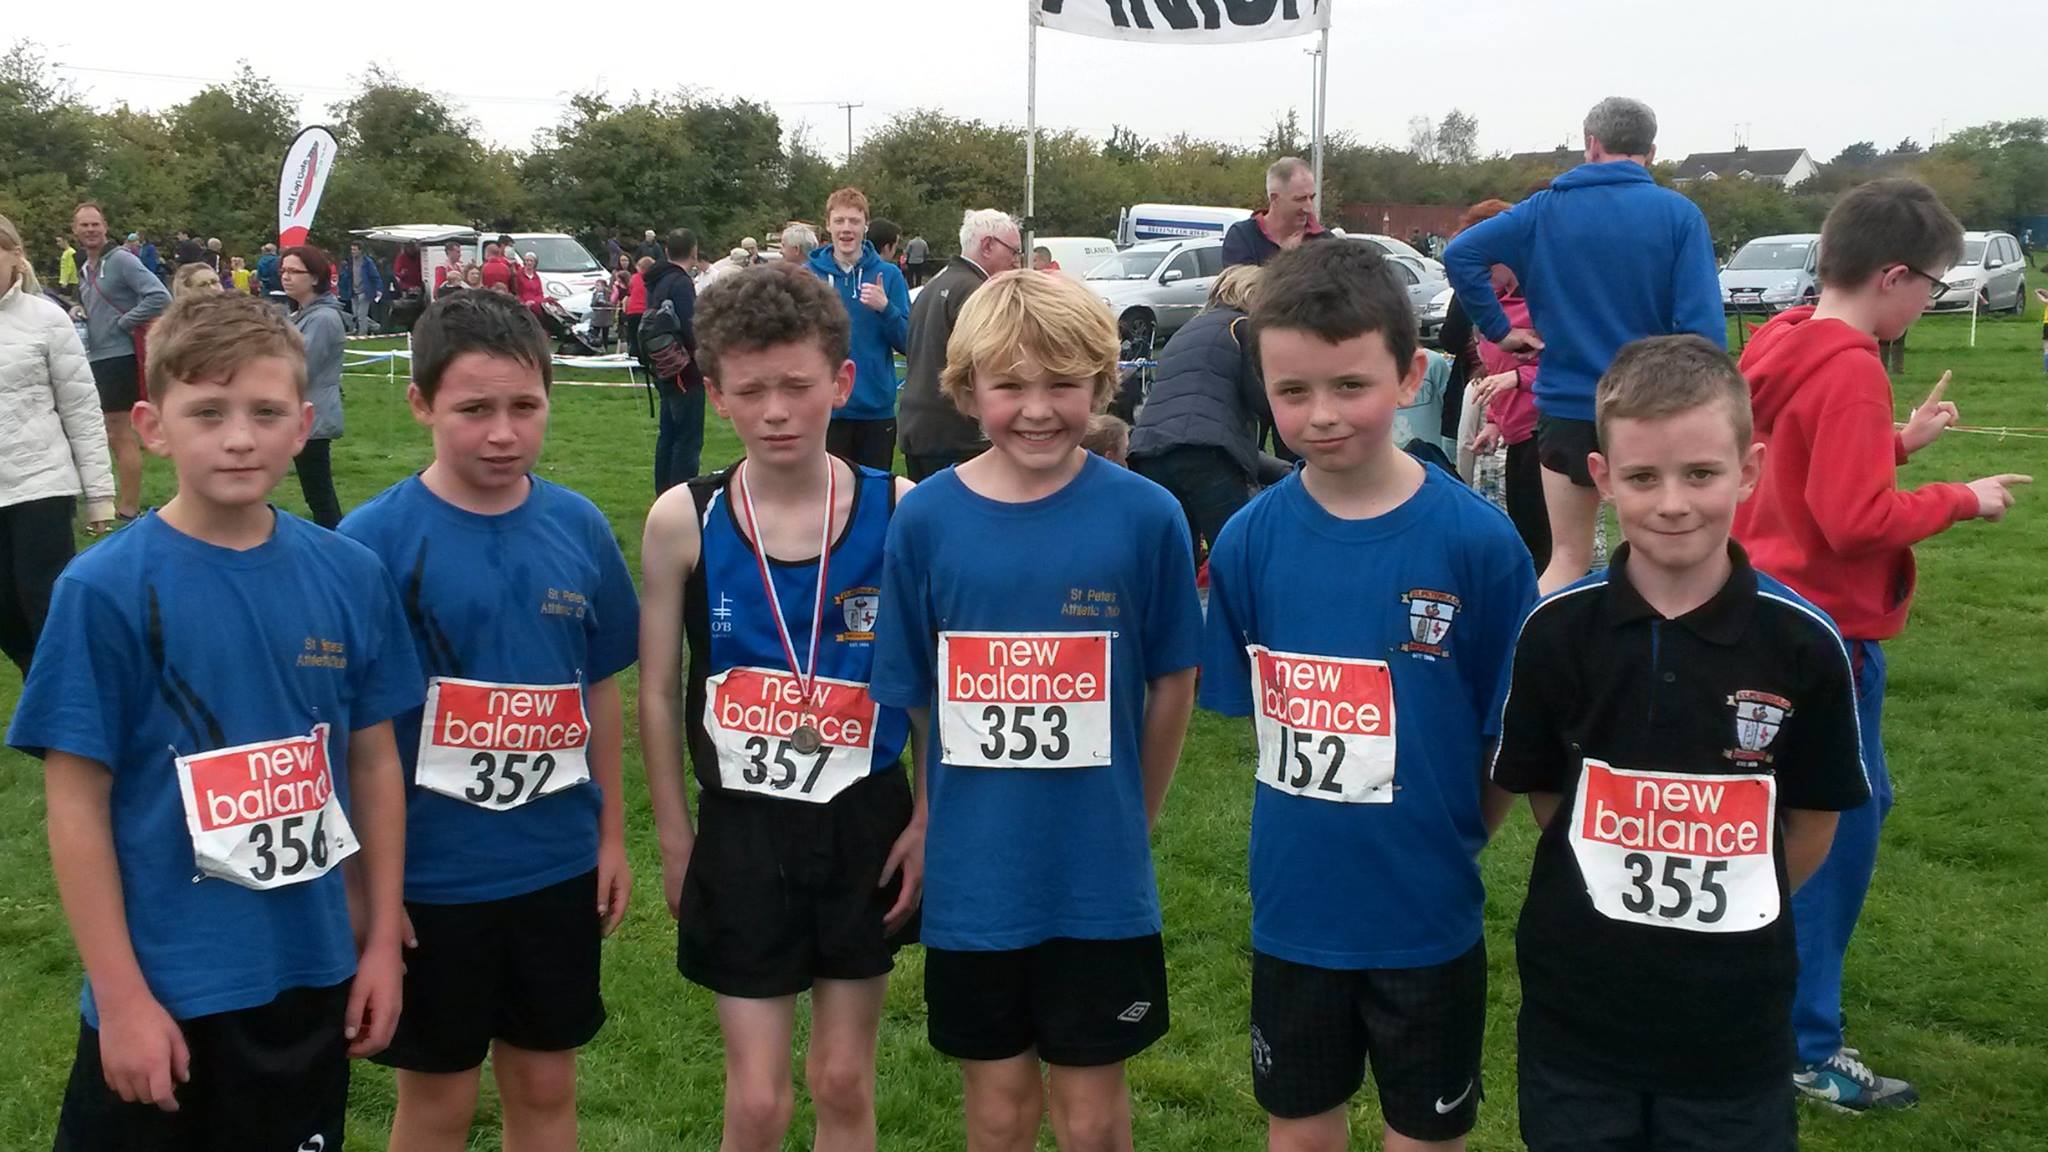 U11 Boys' team at Louth Cross Country Championships (Drogheda, October 2015)